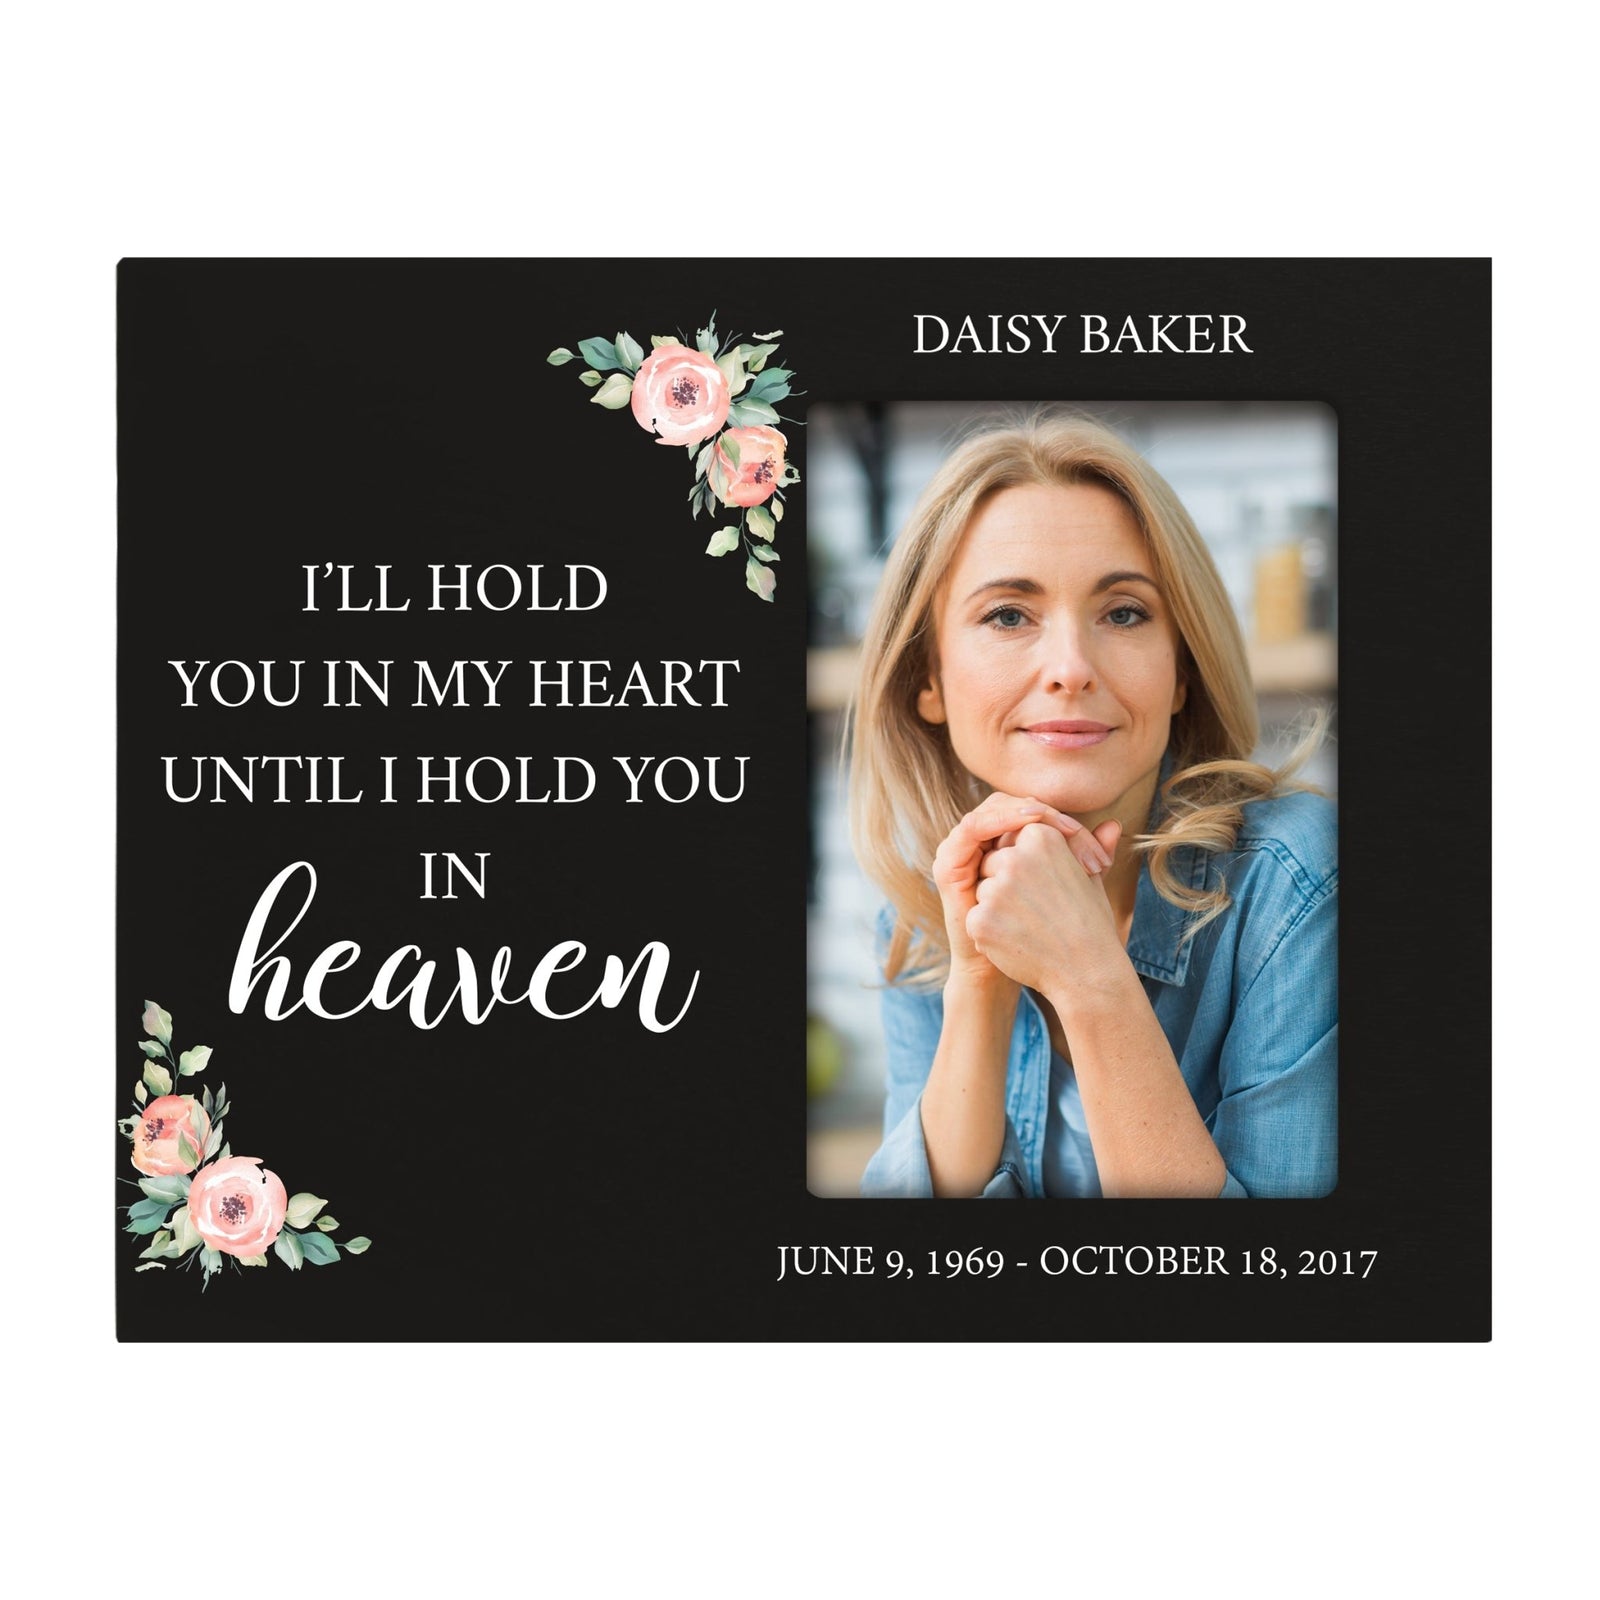 Personalized Horizontal 8x10 Wooden Memorial Picture Frame Holds 4x6 Photo - I’ll Hold You In My (Black) - LifeSong Milestones